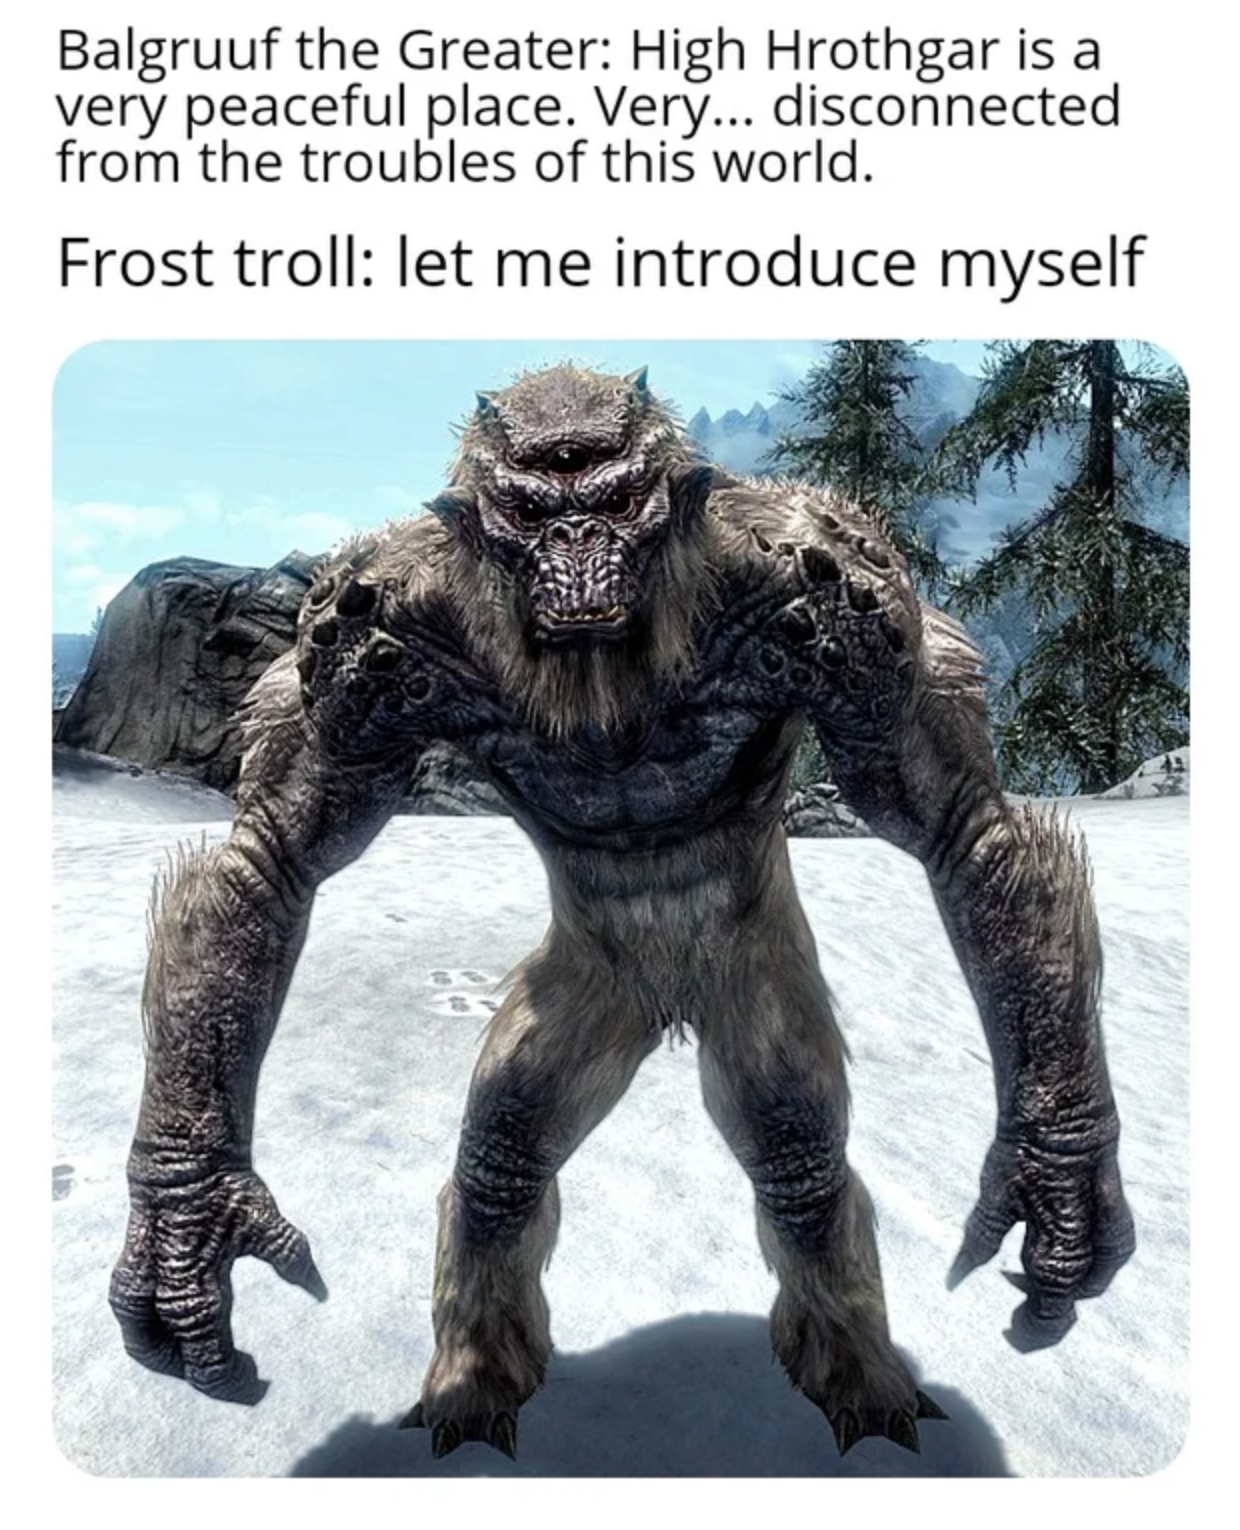 funny gaming memes - deathclaw death battle - Balgruuf the Greater High Hrothgar is a very peaceful place. Very... disconnected from the troubles of this world. Frost troll let me introduce myself